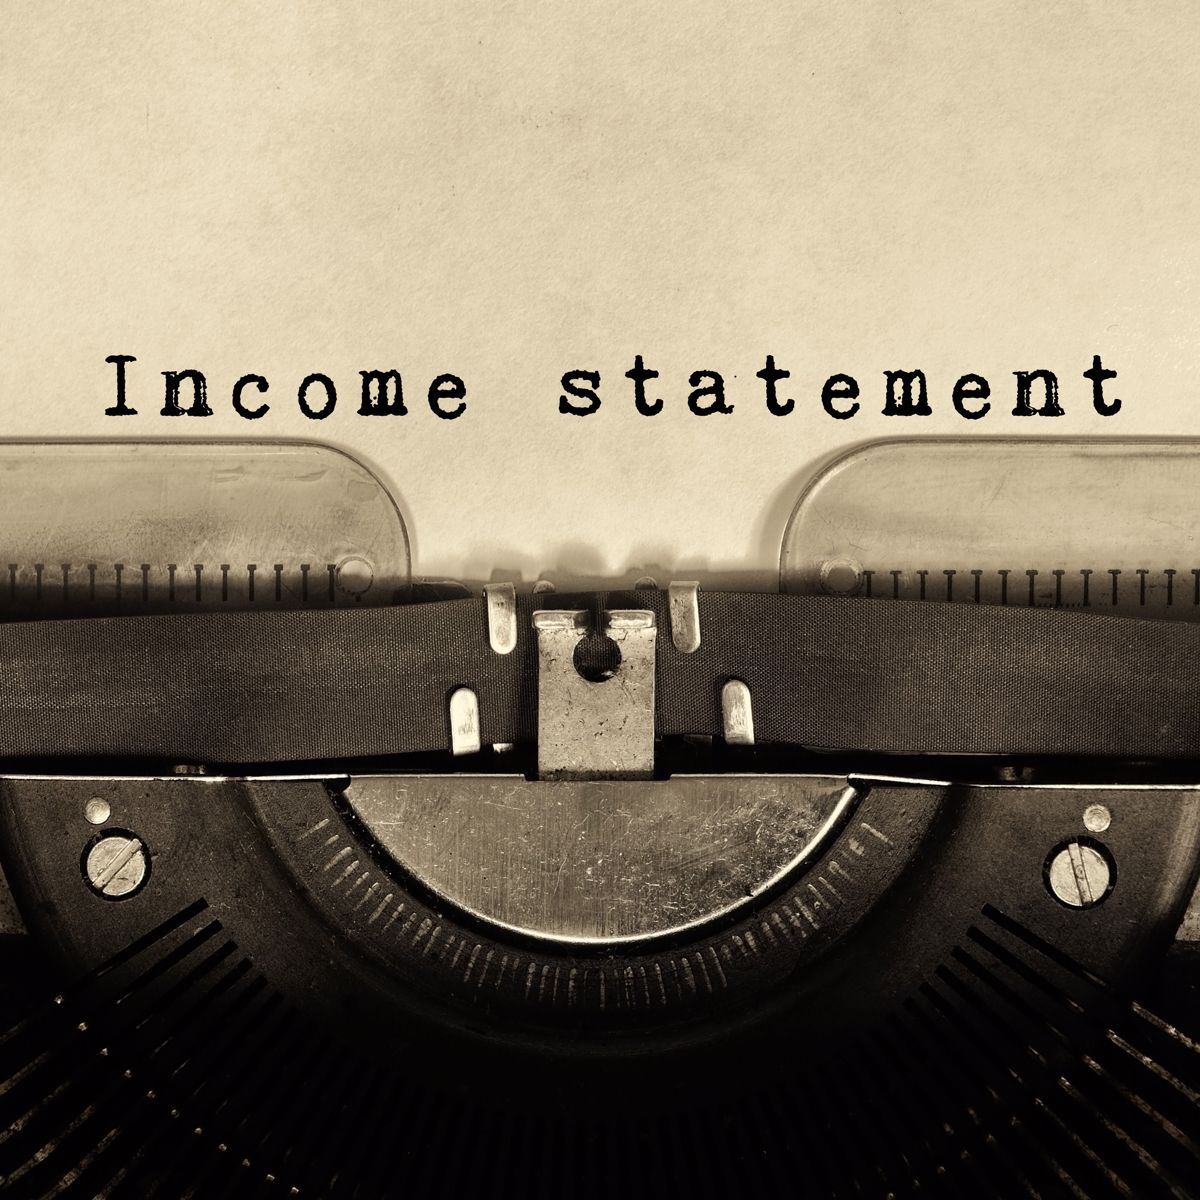 Words "Income Statement" written by a typewriter.